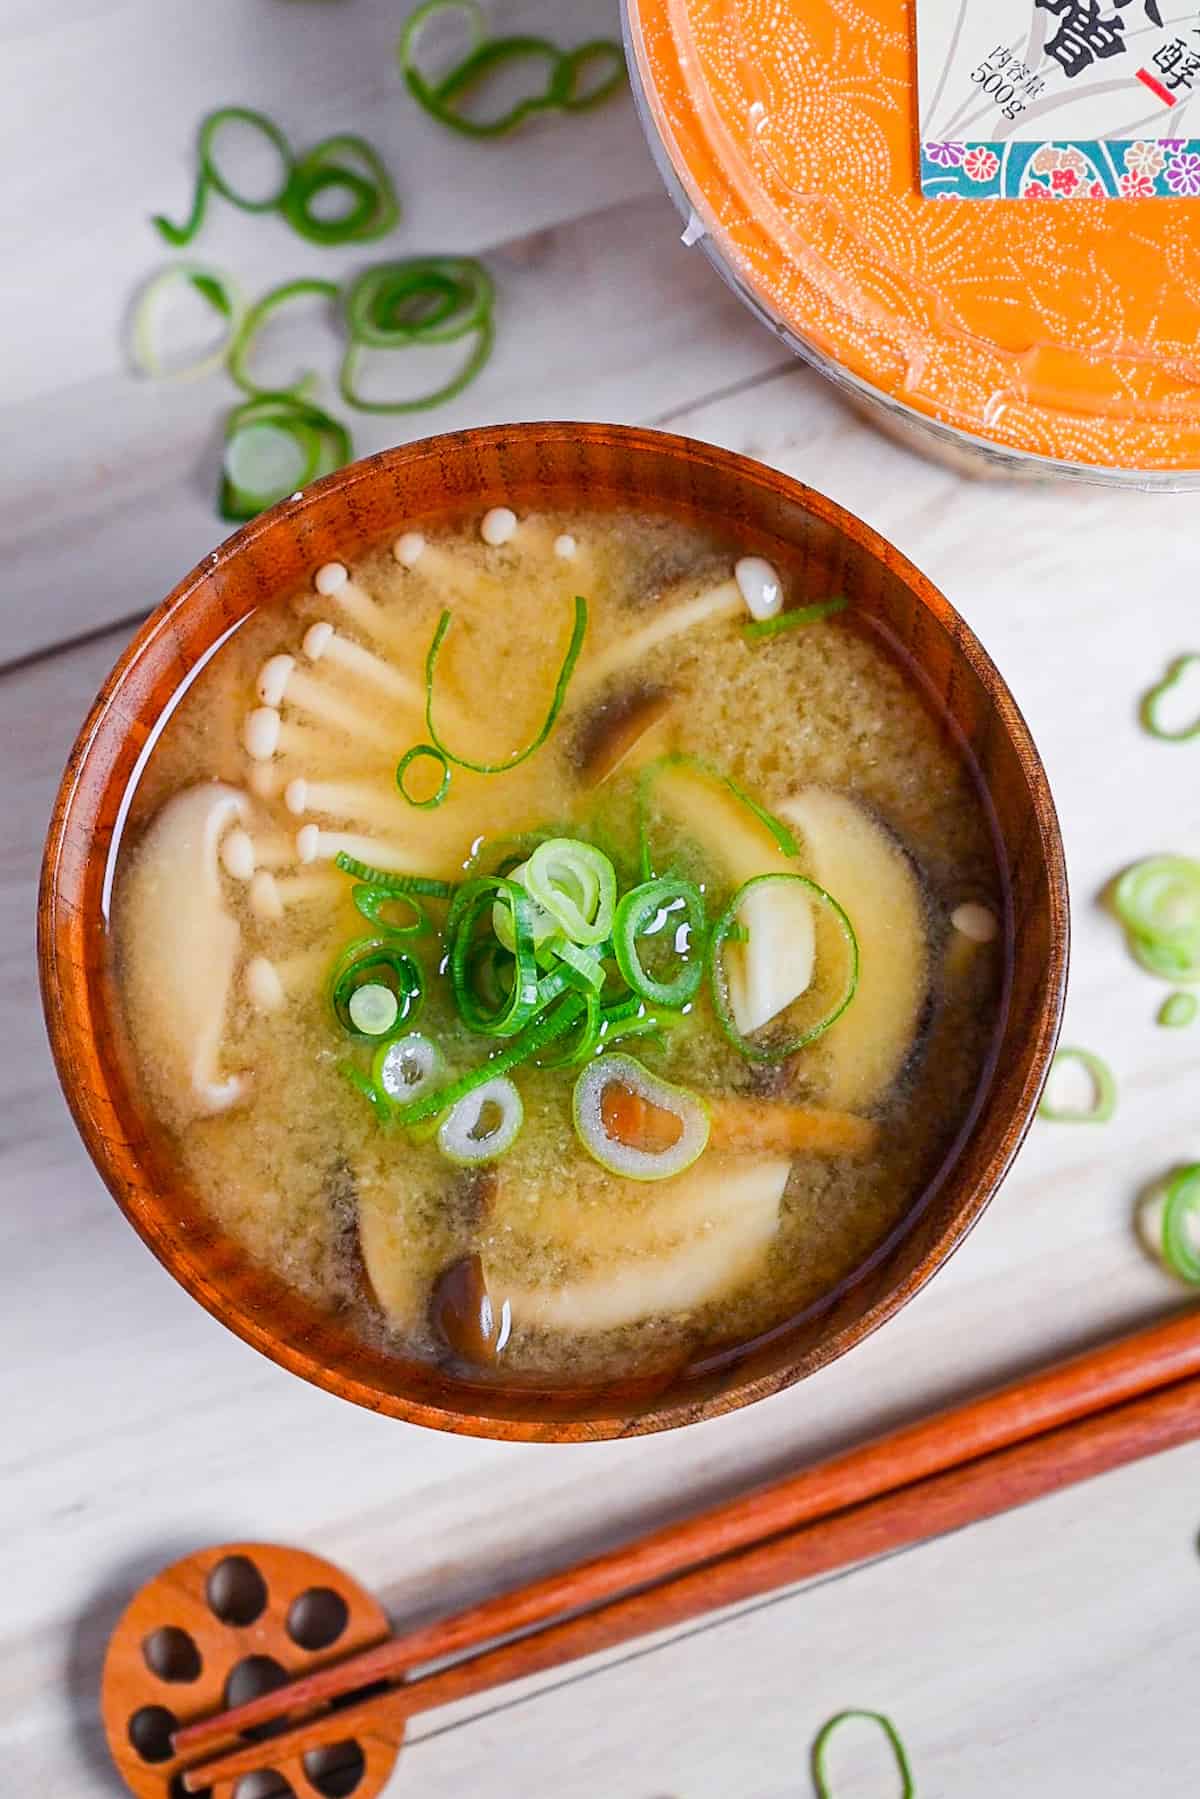 Mushroom miso soup made with 4 kinds of mushroom served in a wooden bowl top down view